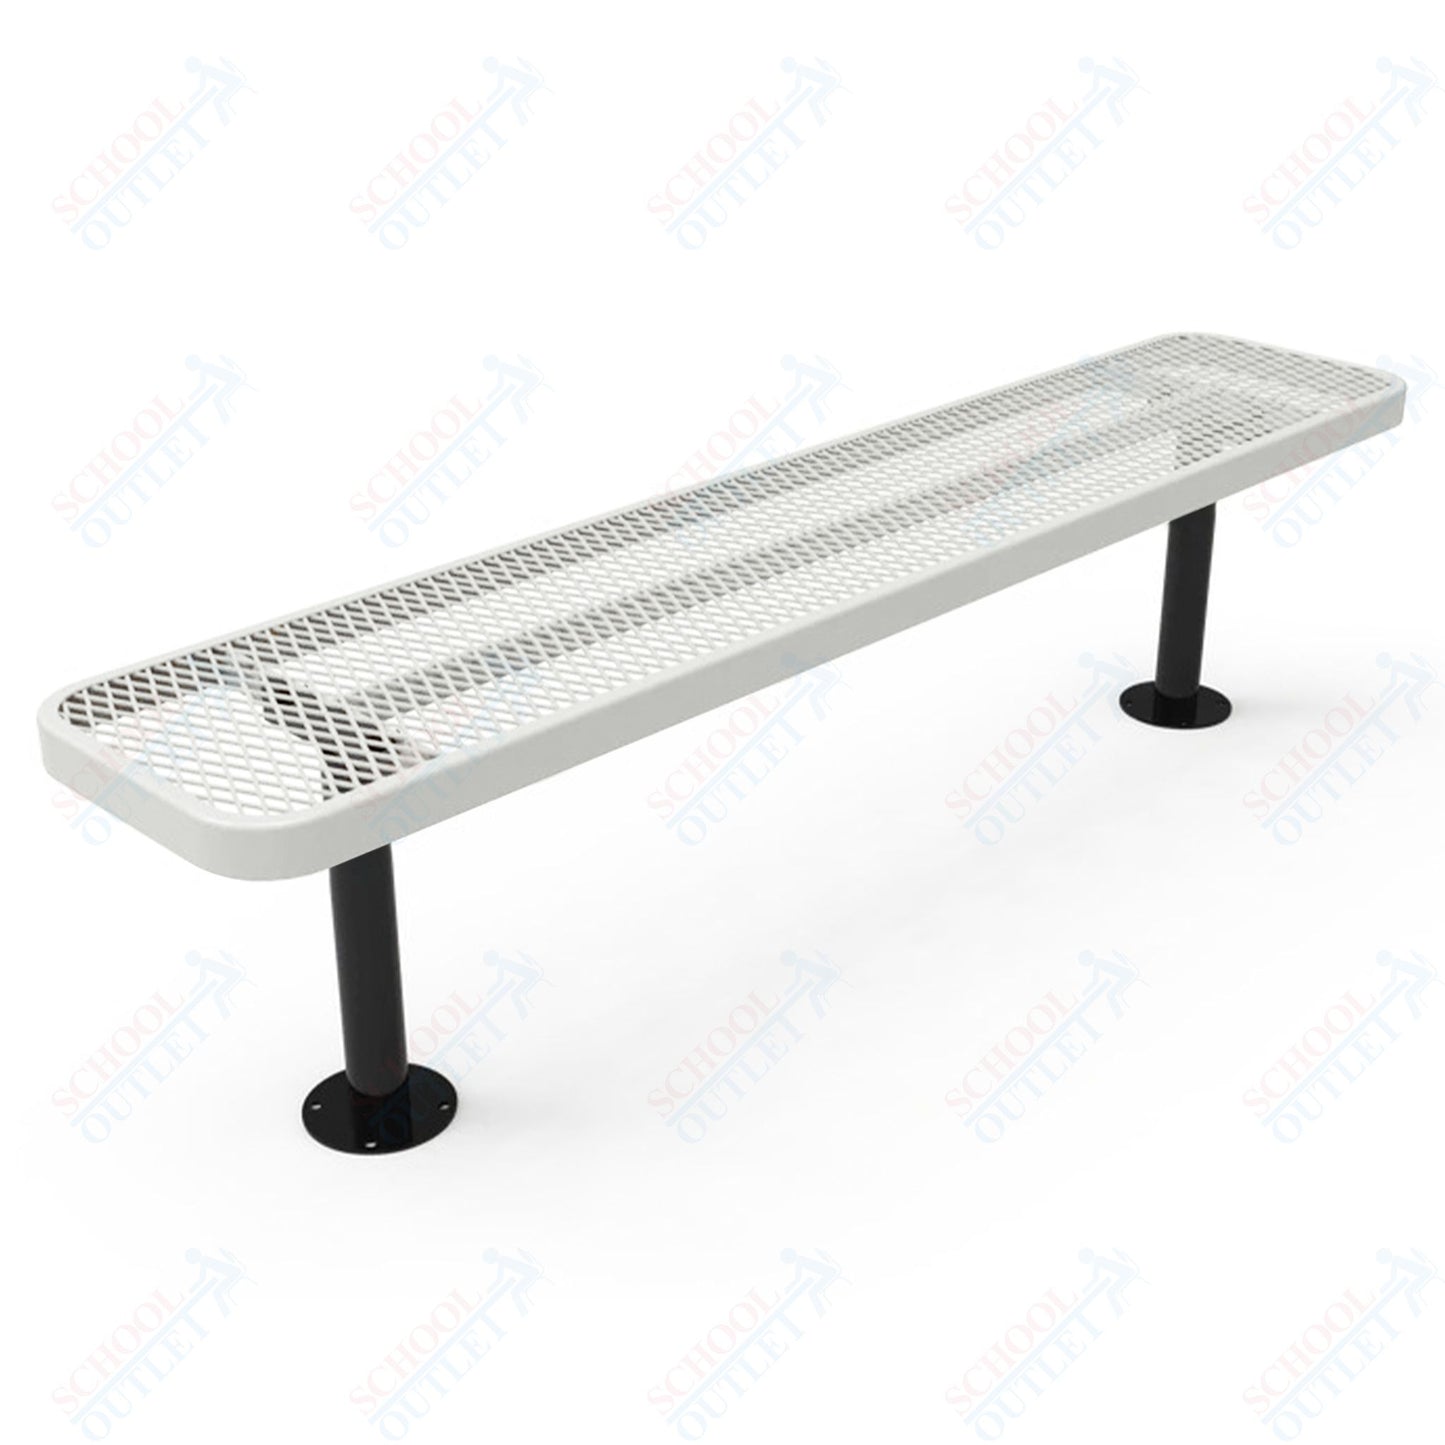 MyTcoat - Player's Outdoor Bench without Back - Surface Mount 8' L (MYT-BPY08-35)